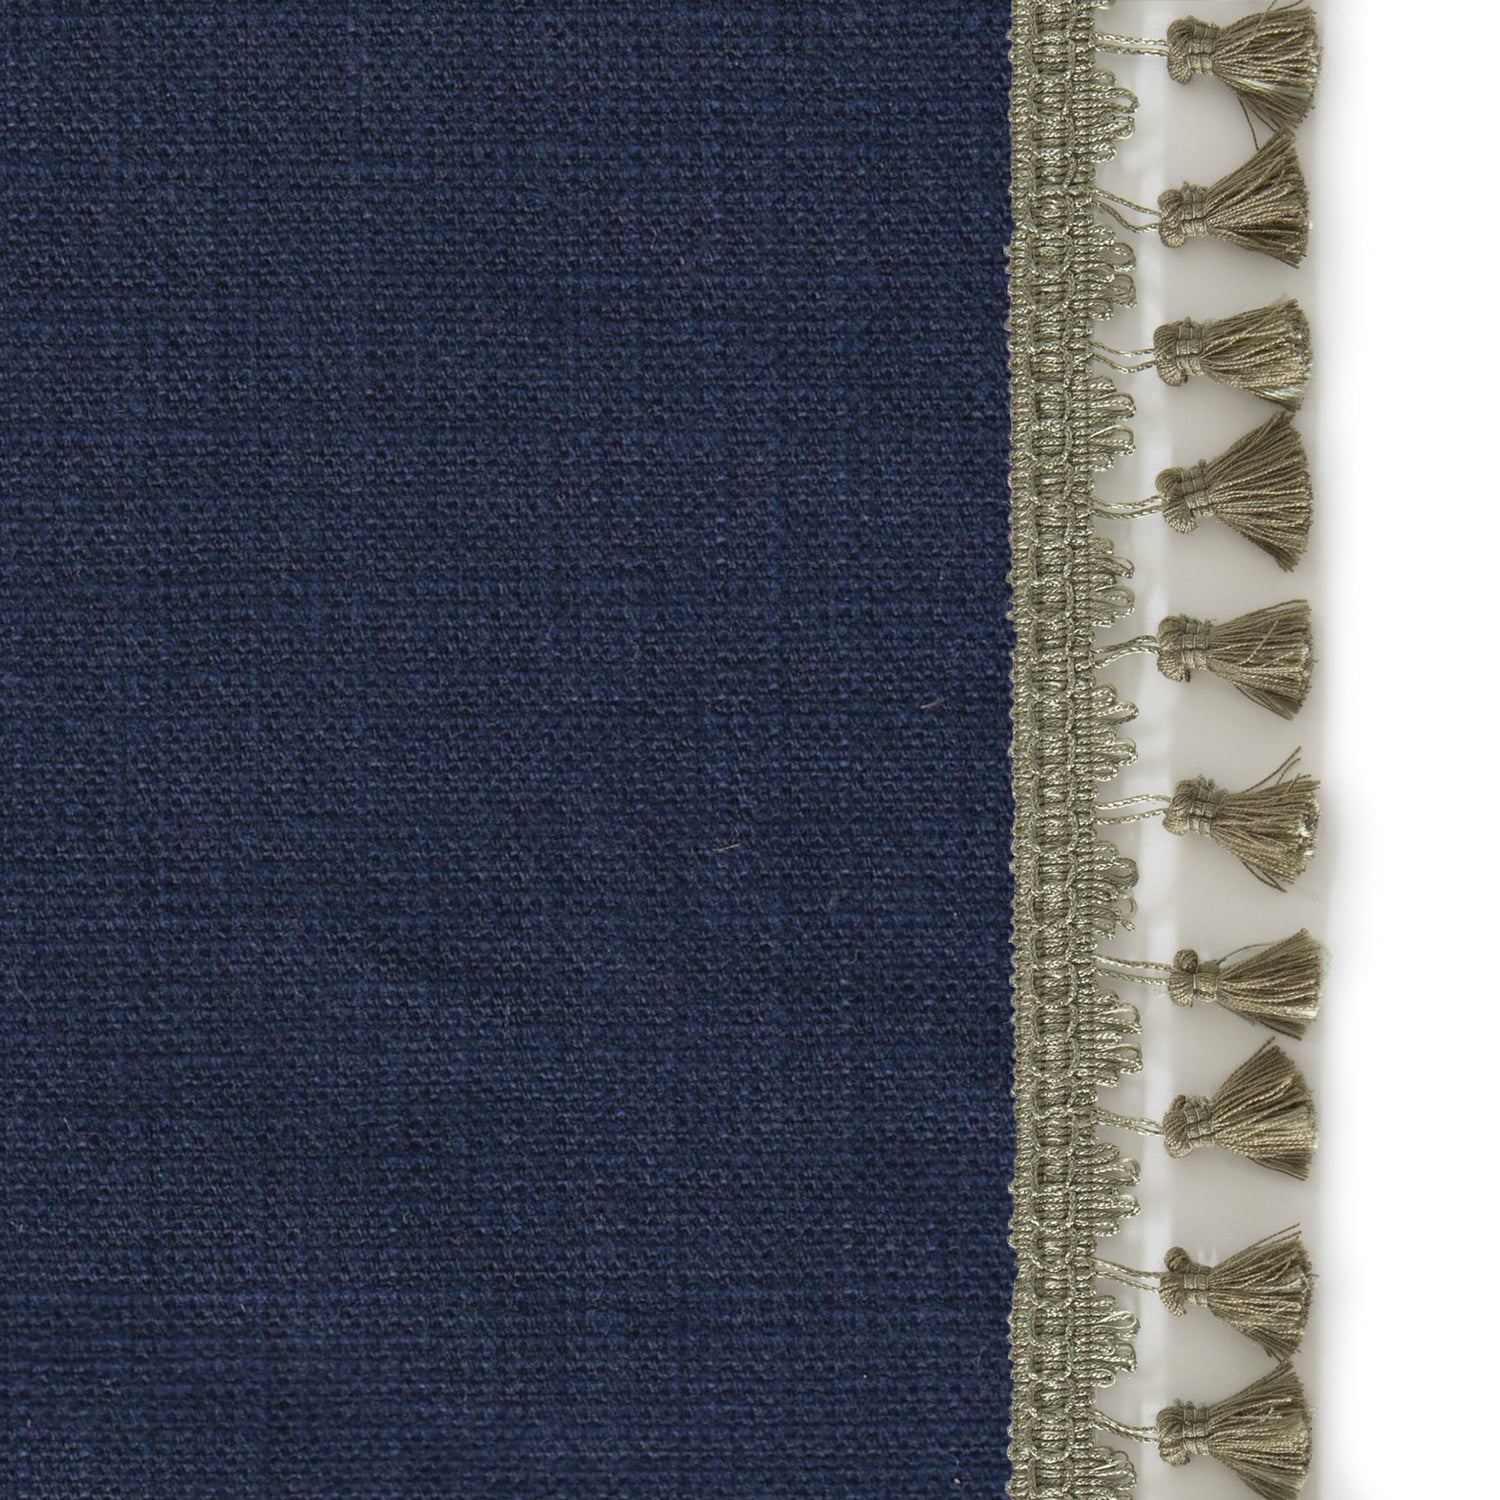 Upclose picture of Midnight custom Navy Bluecurtain with sage tassel trim